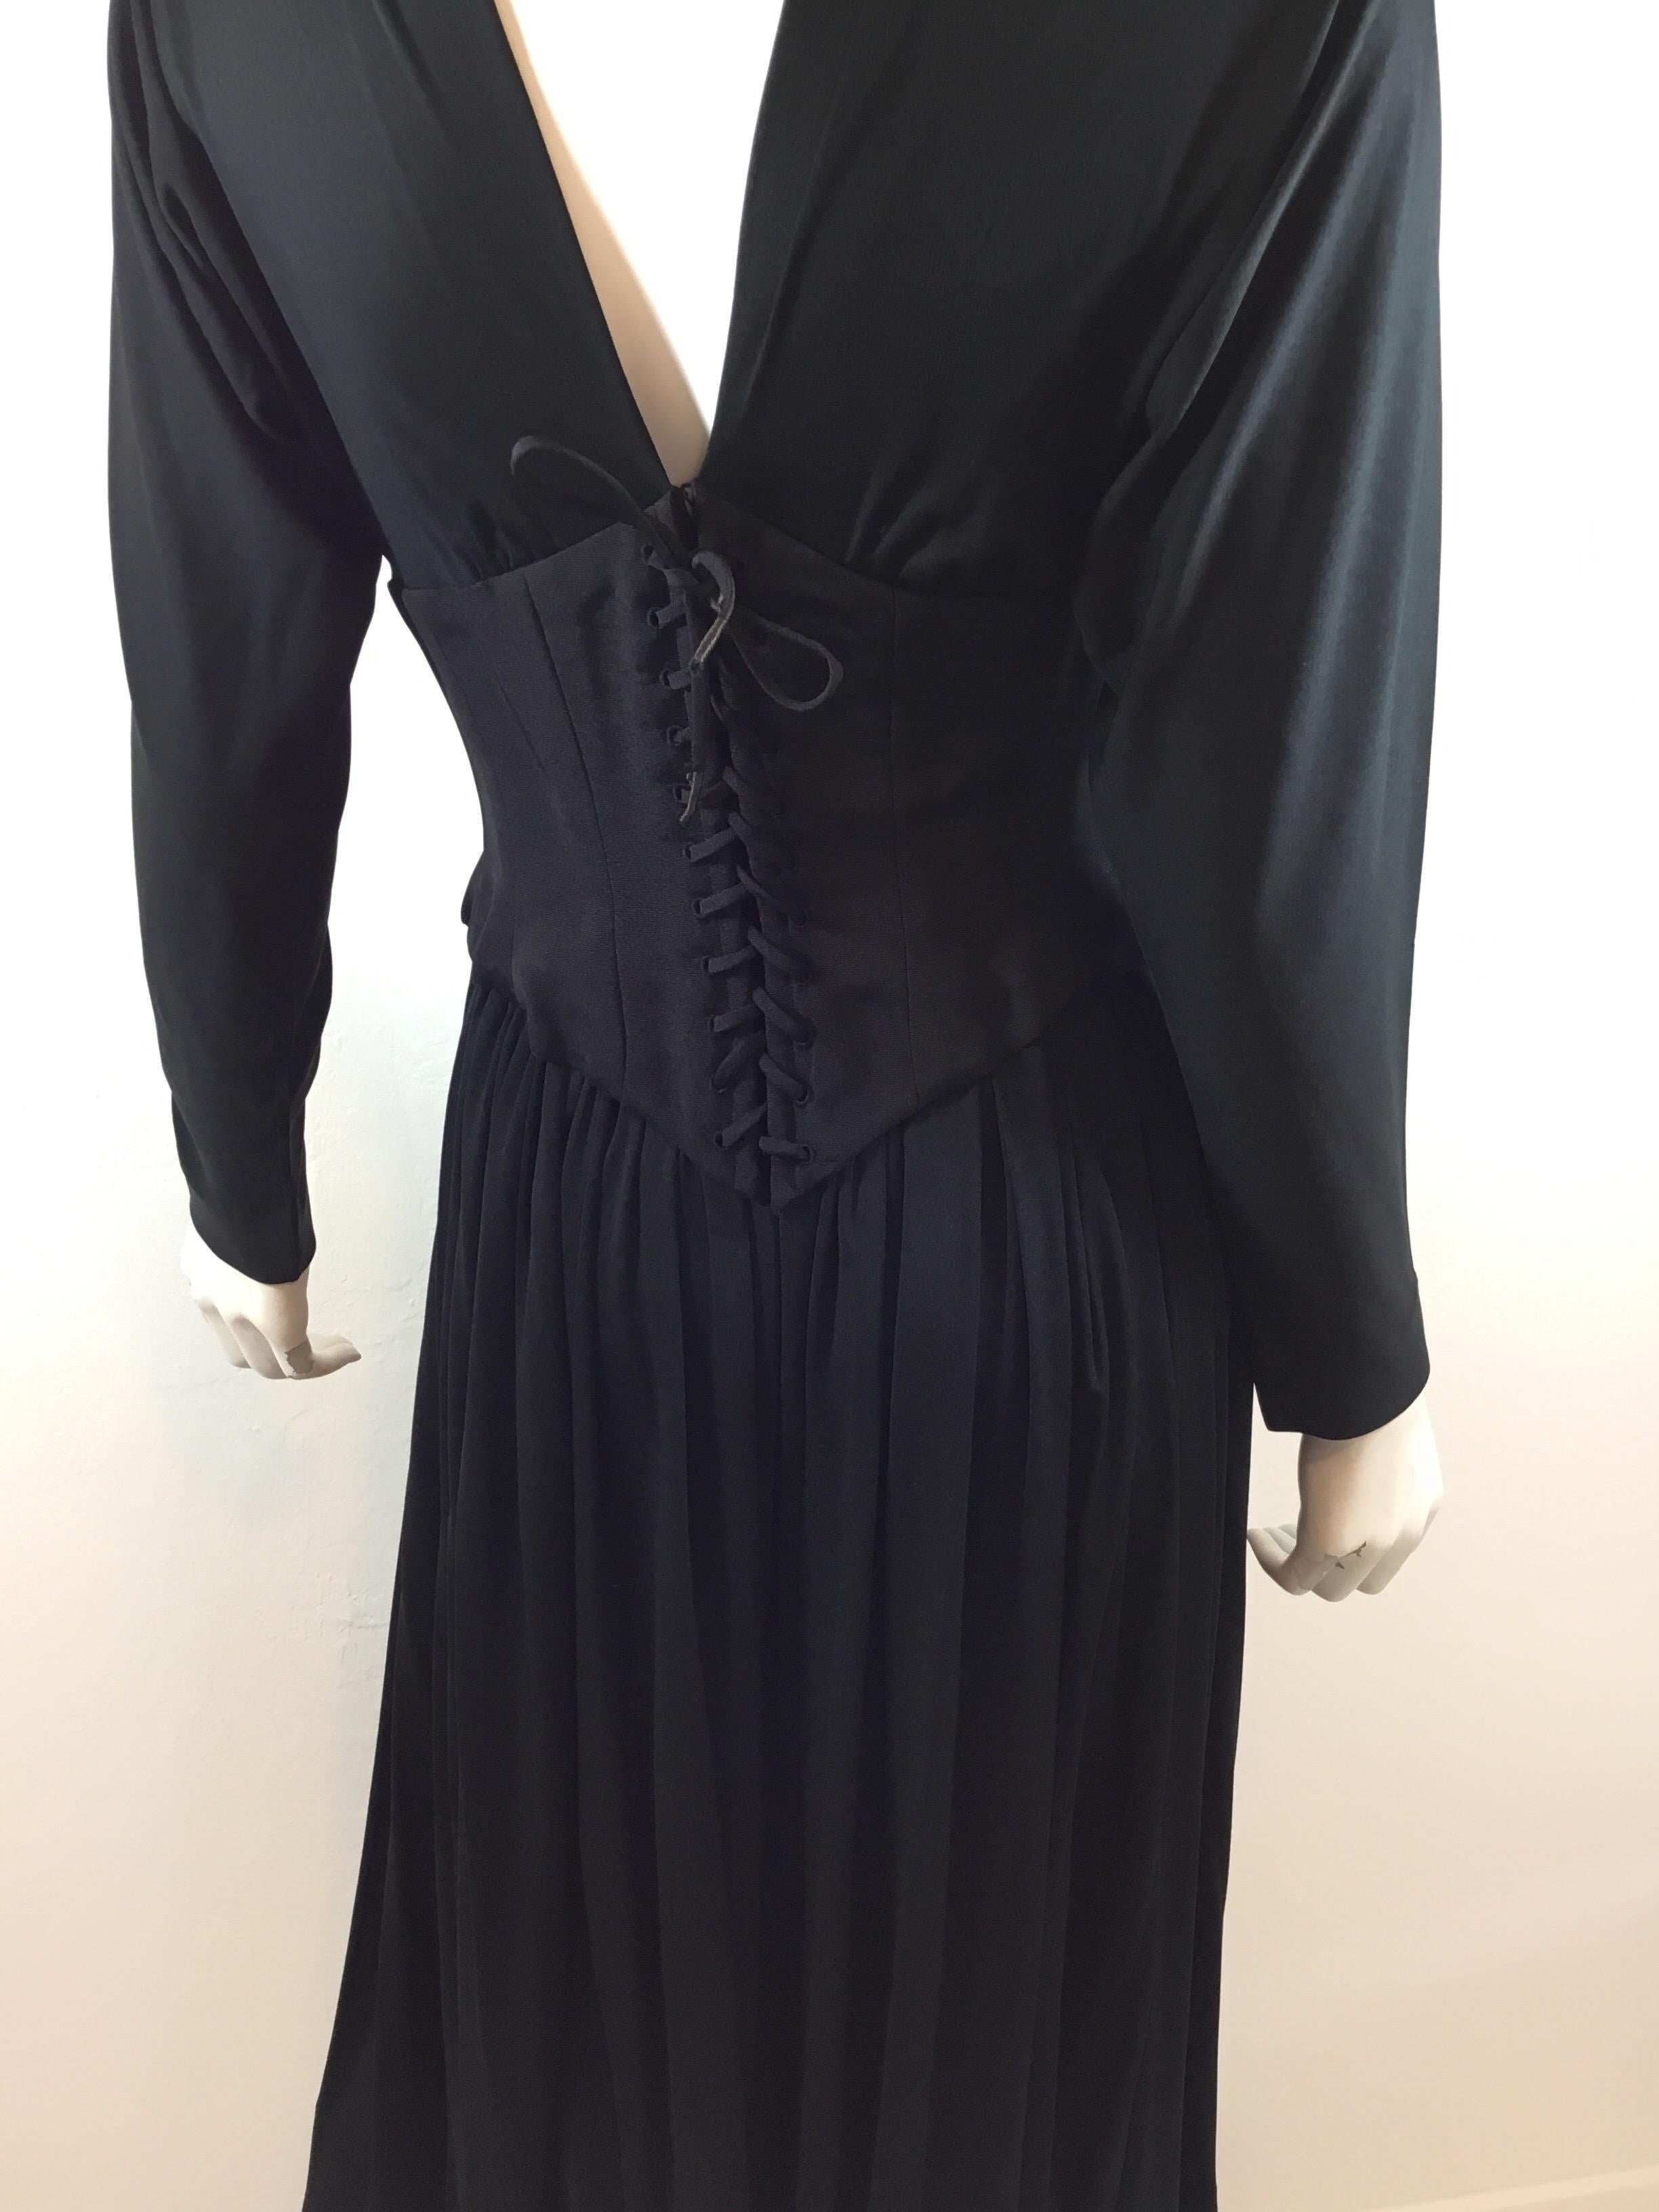 Norman Norell 1940s Matte Jersey Corseted Blouse and Skirt  For Sale 2